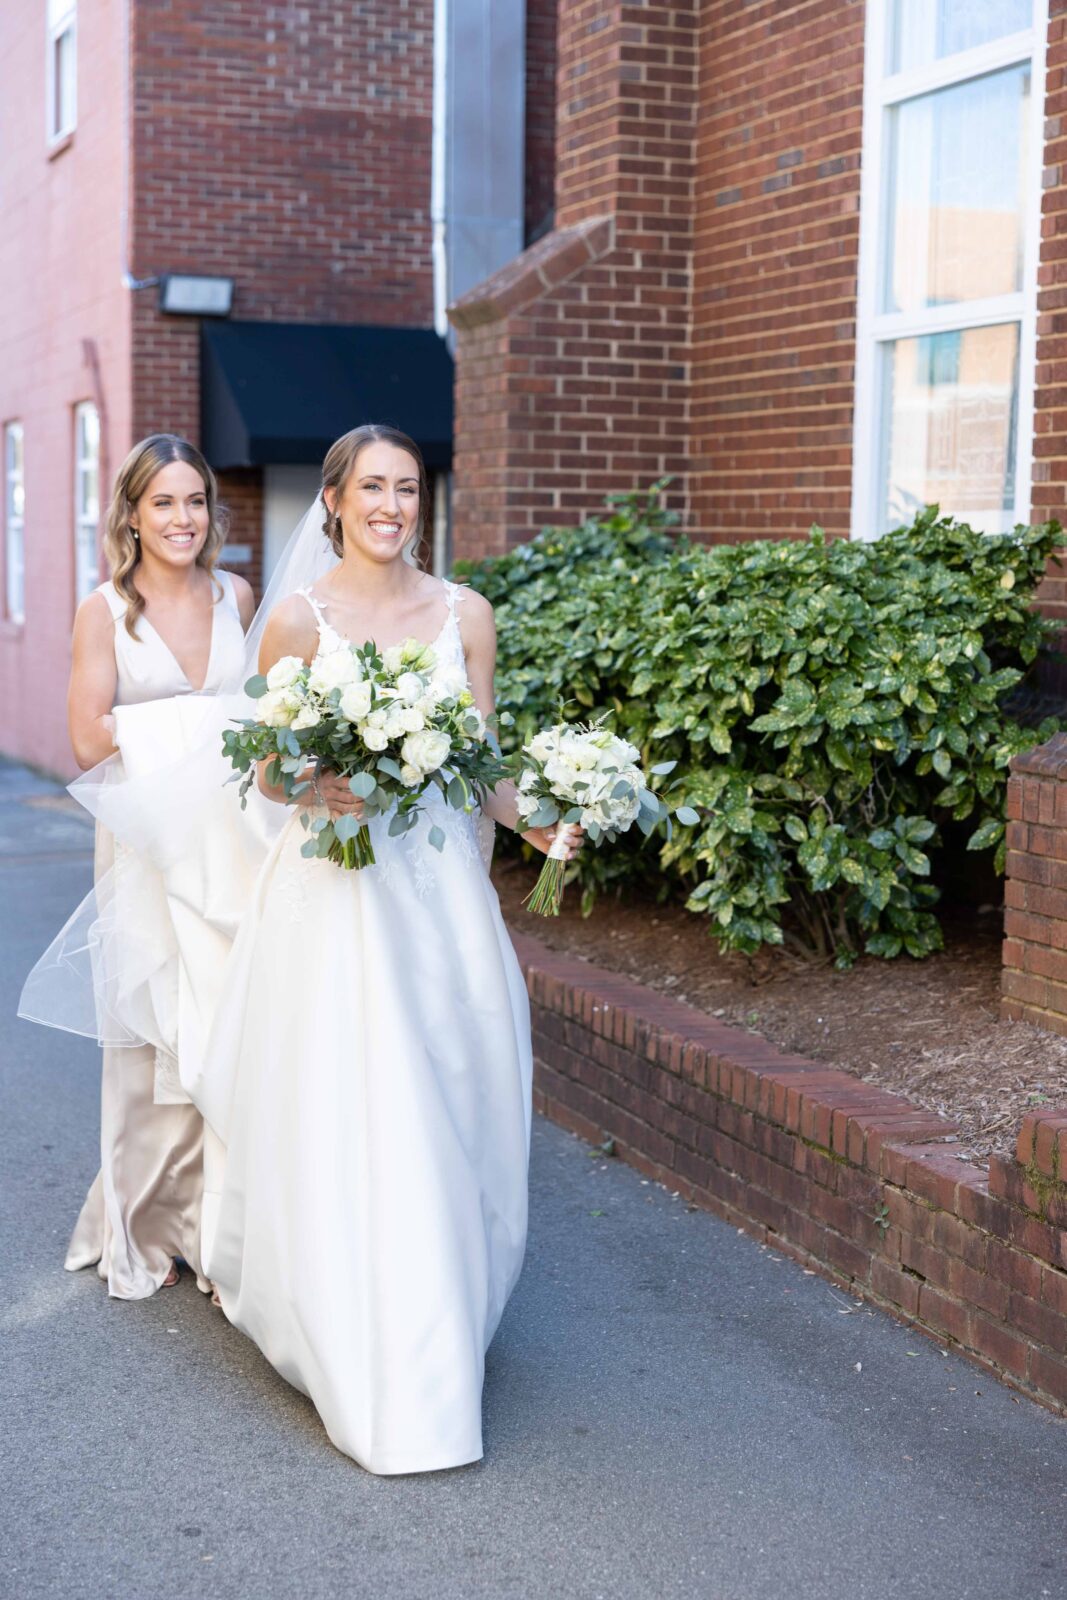 Bride wearing plunging v necked wedding dress with lace floral detail and cathetrial length train held by bridesmaid in gold satin dress